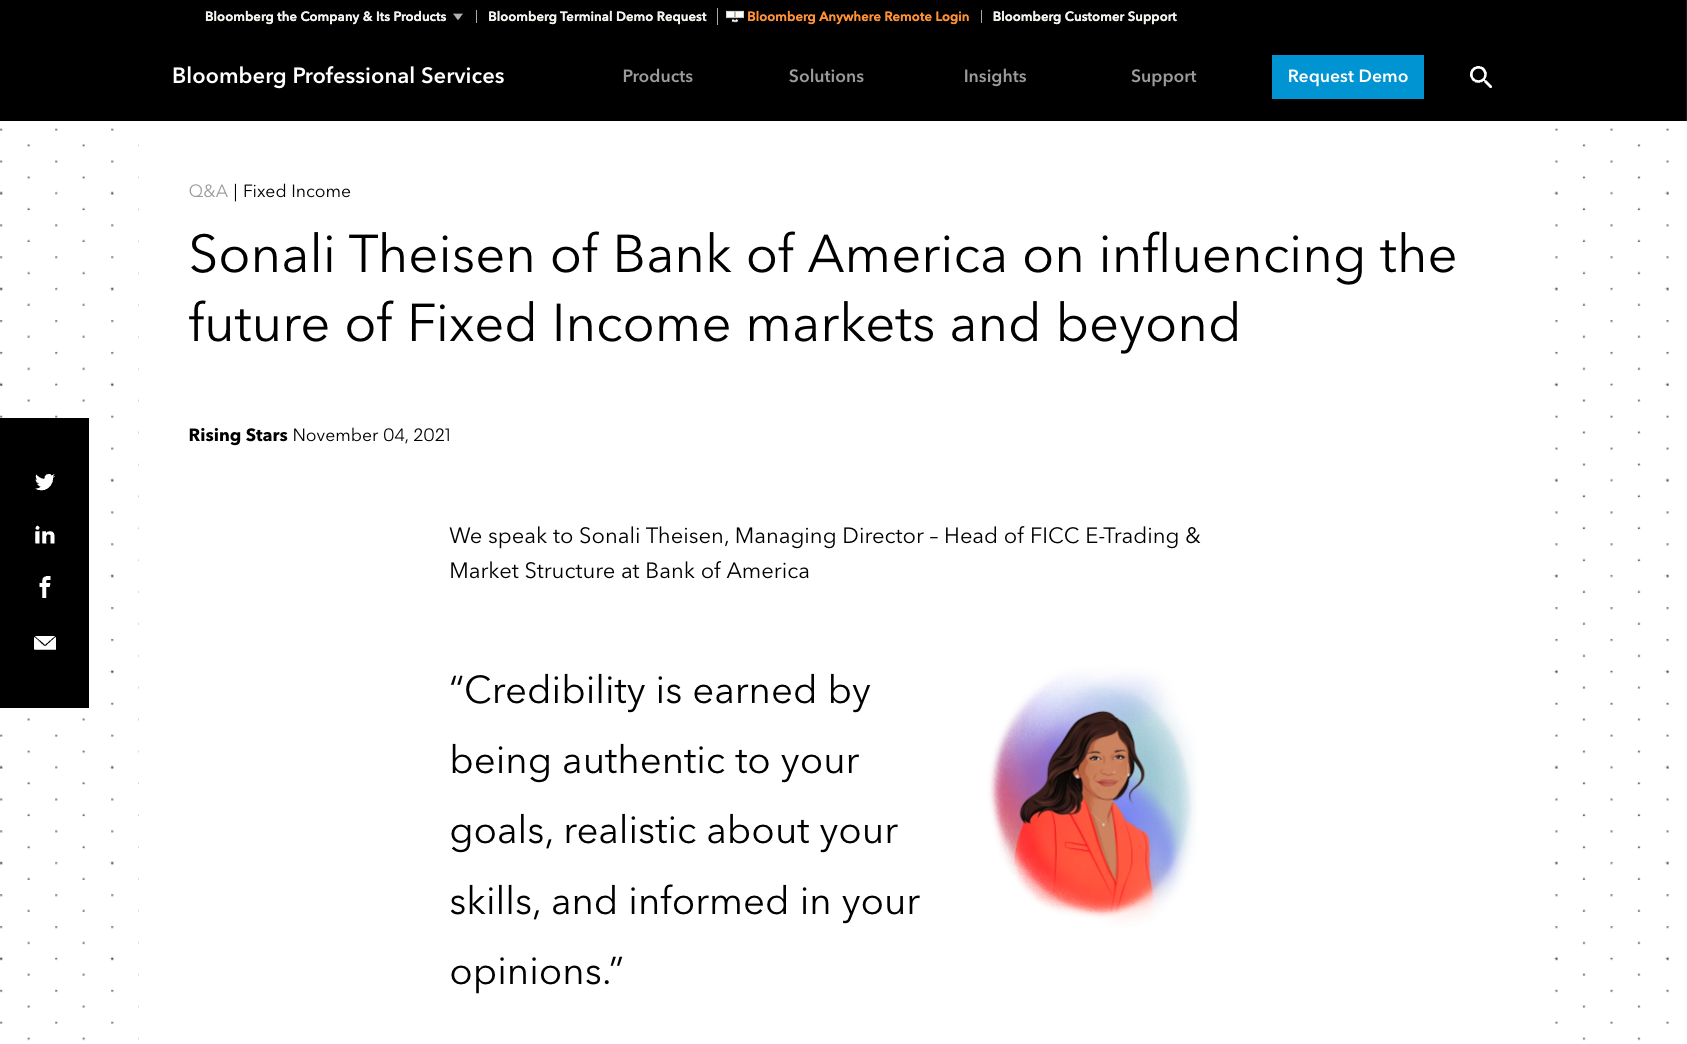 Sonali Theisen of Bank of America on influencing the future of Fixed Income markets and beyond